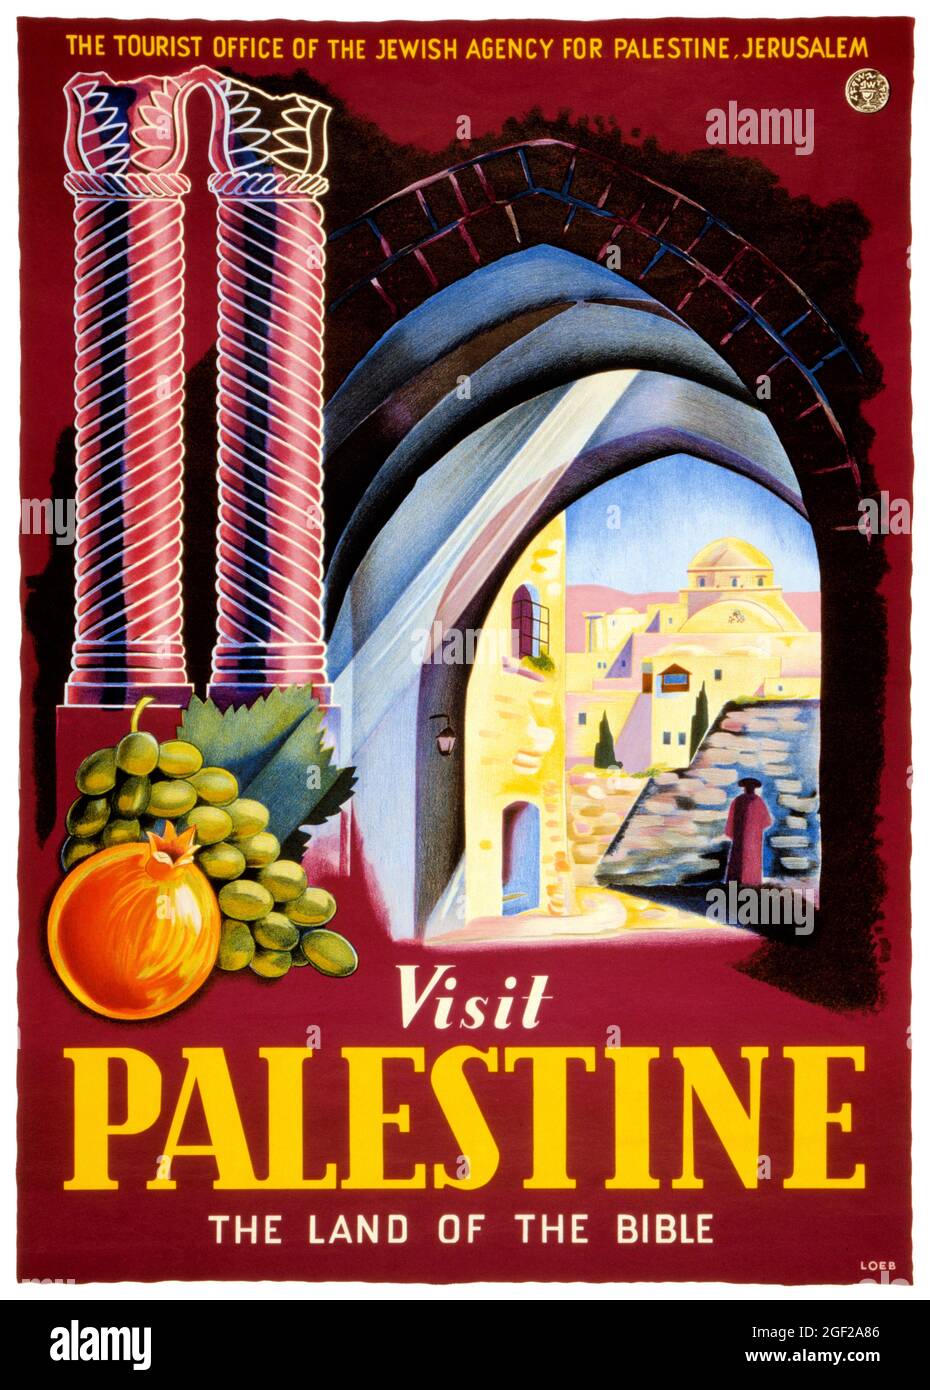 Visit Palestine. The land of the bible by Mitchell Loeb (1889-1968). Restored vintage poster published in 1947 in Palestine. Stock Photo